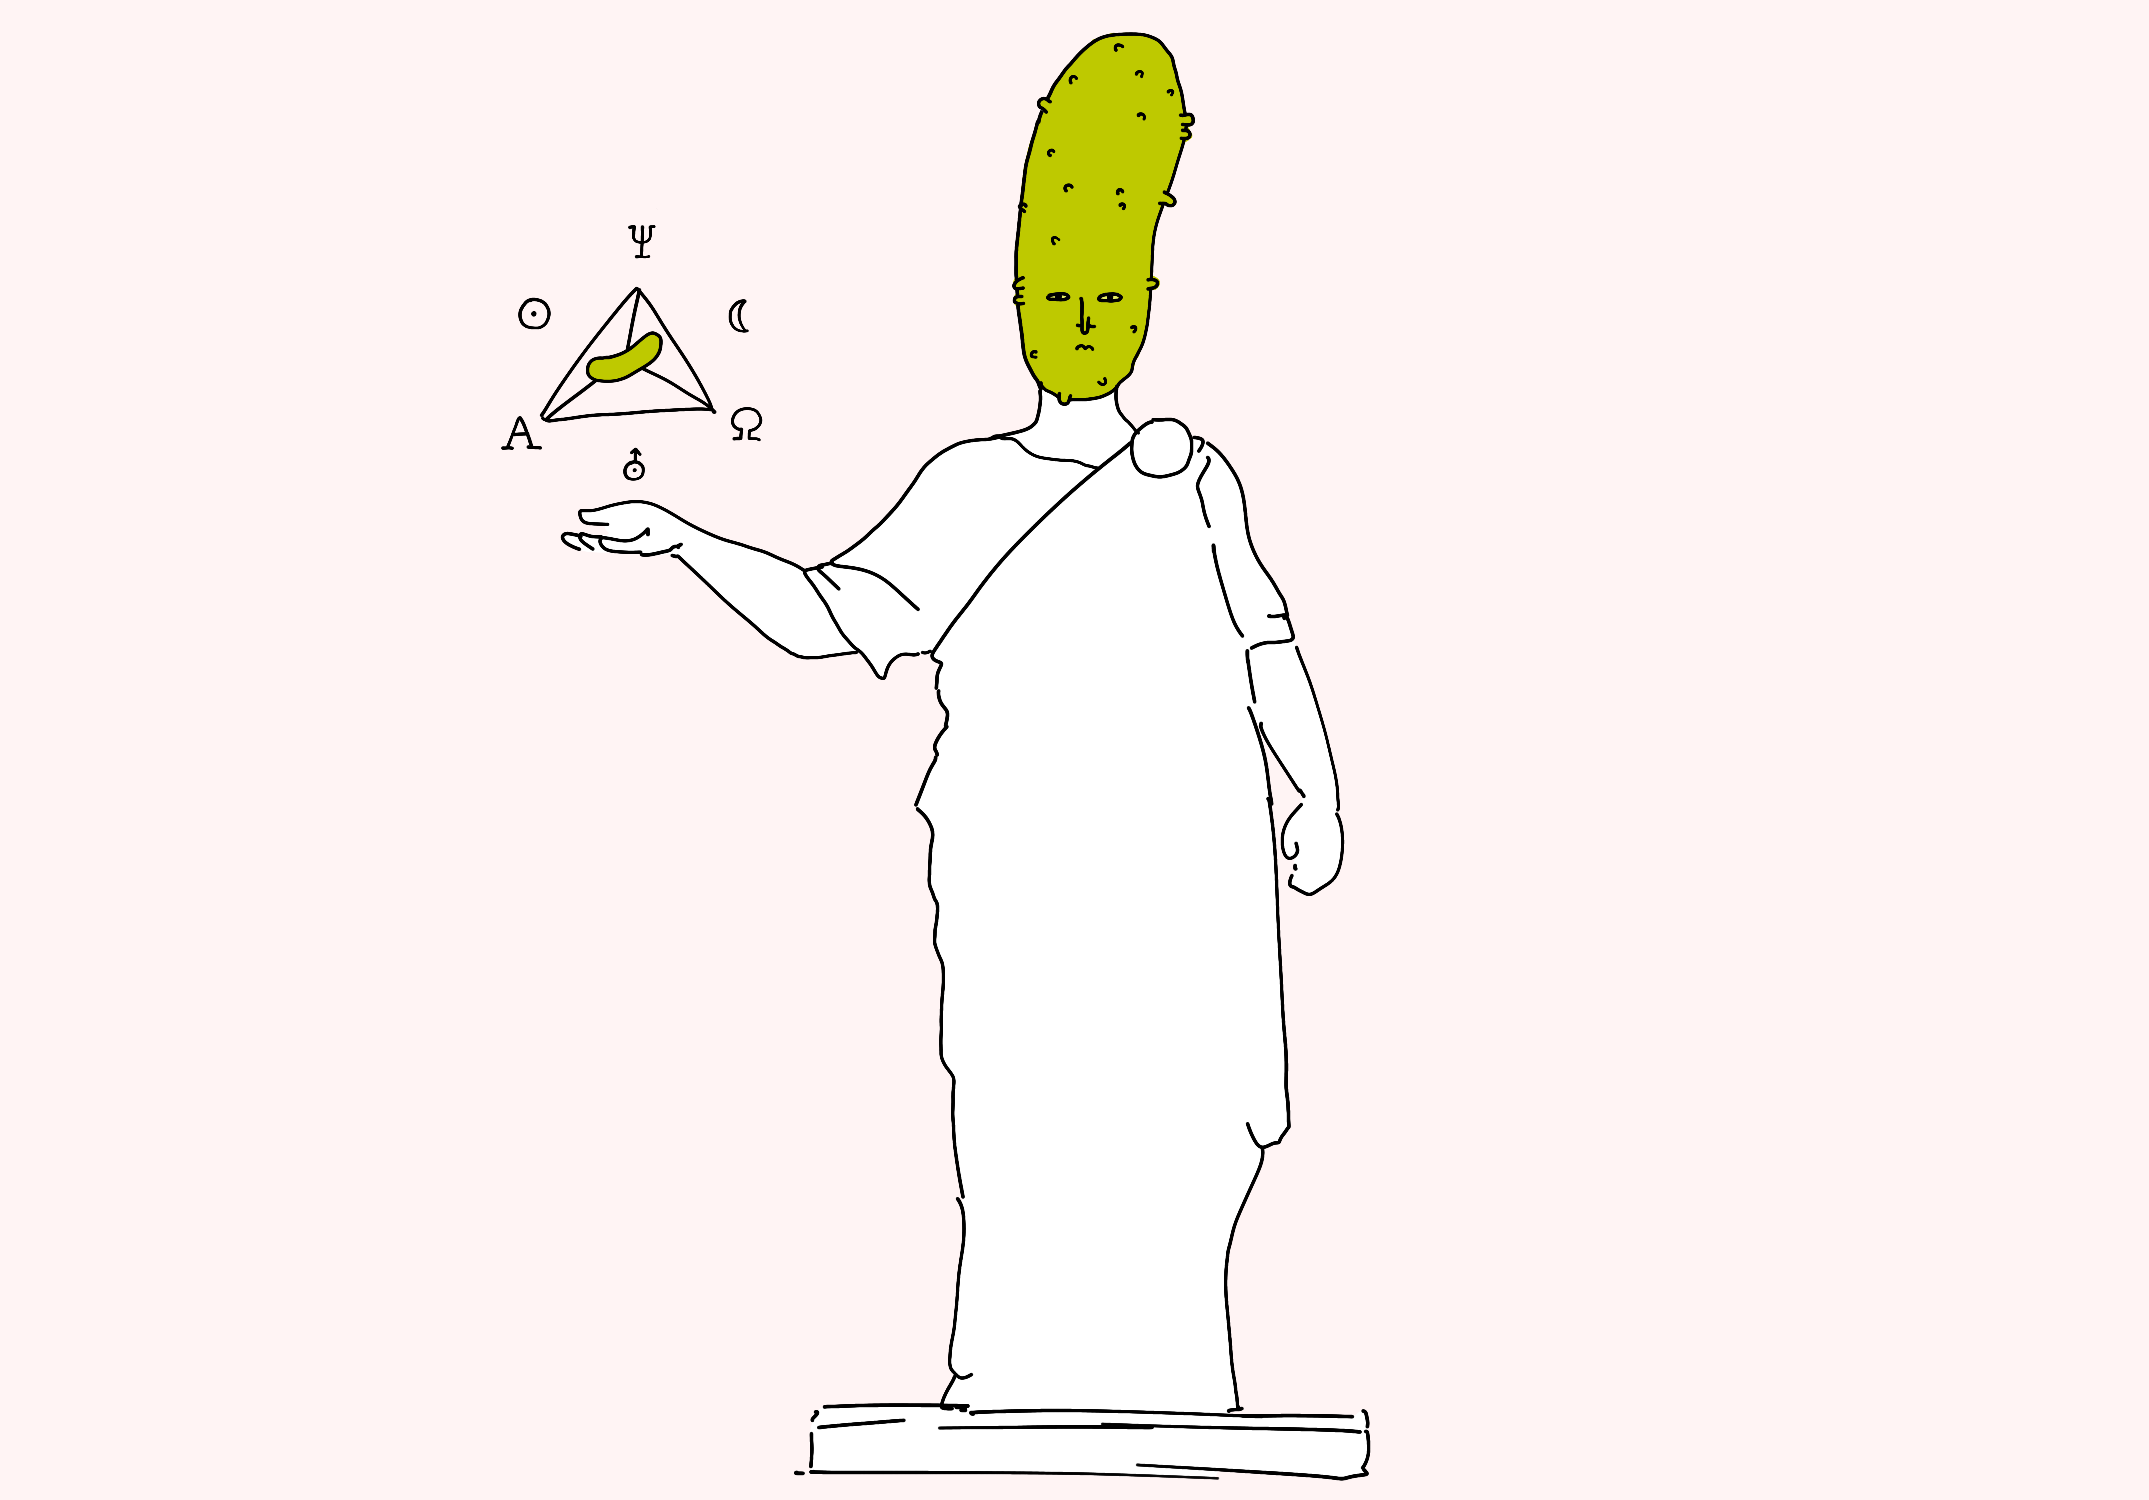 Greek philosopher, with a pickle for his head, holding a pickle-themed artefact in his hand